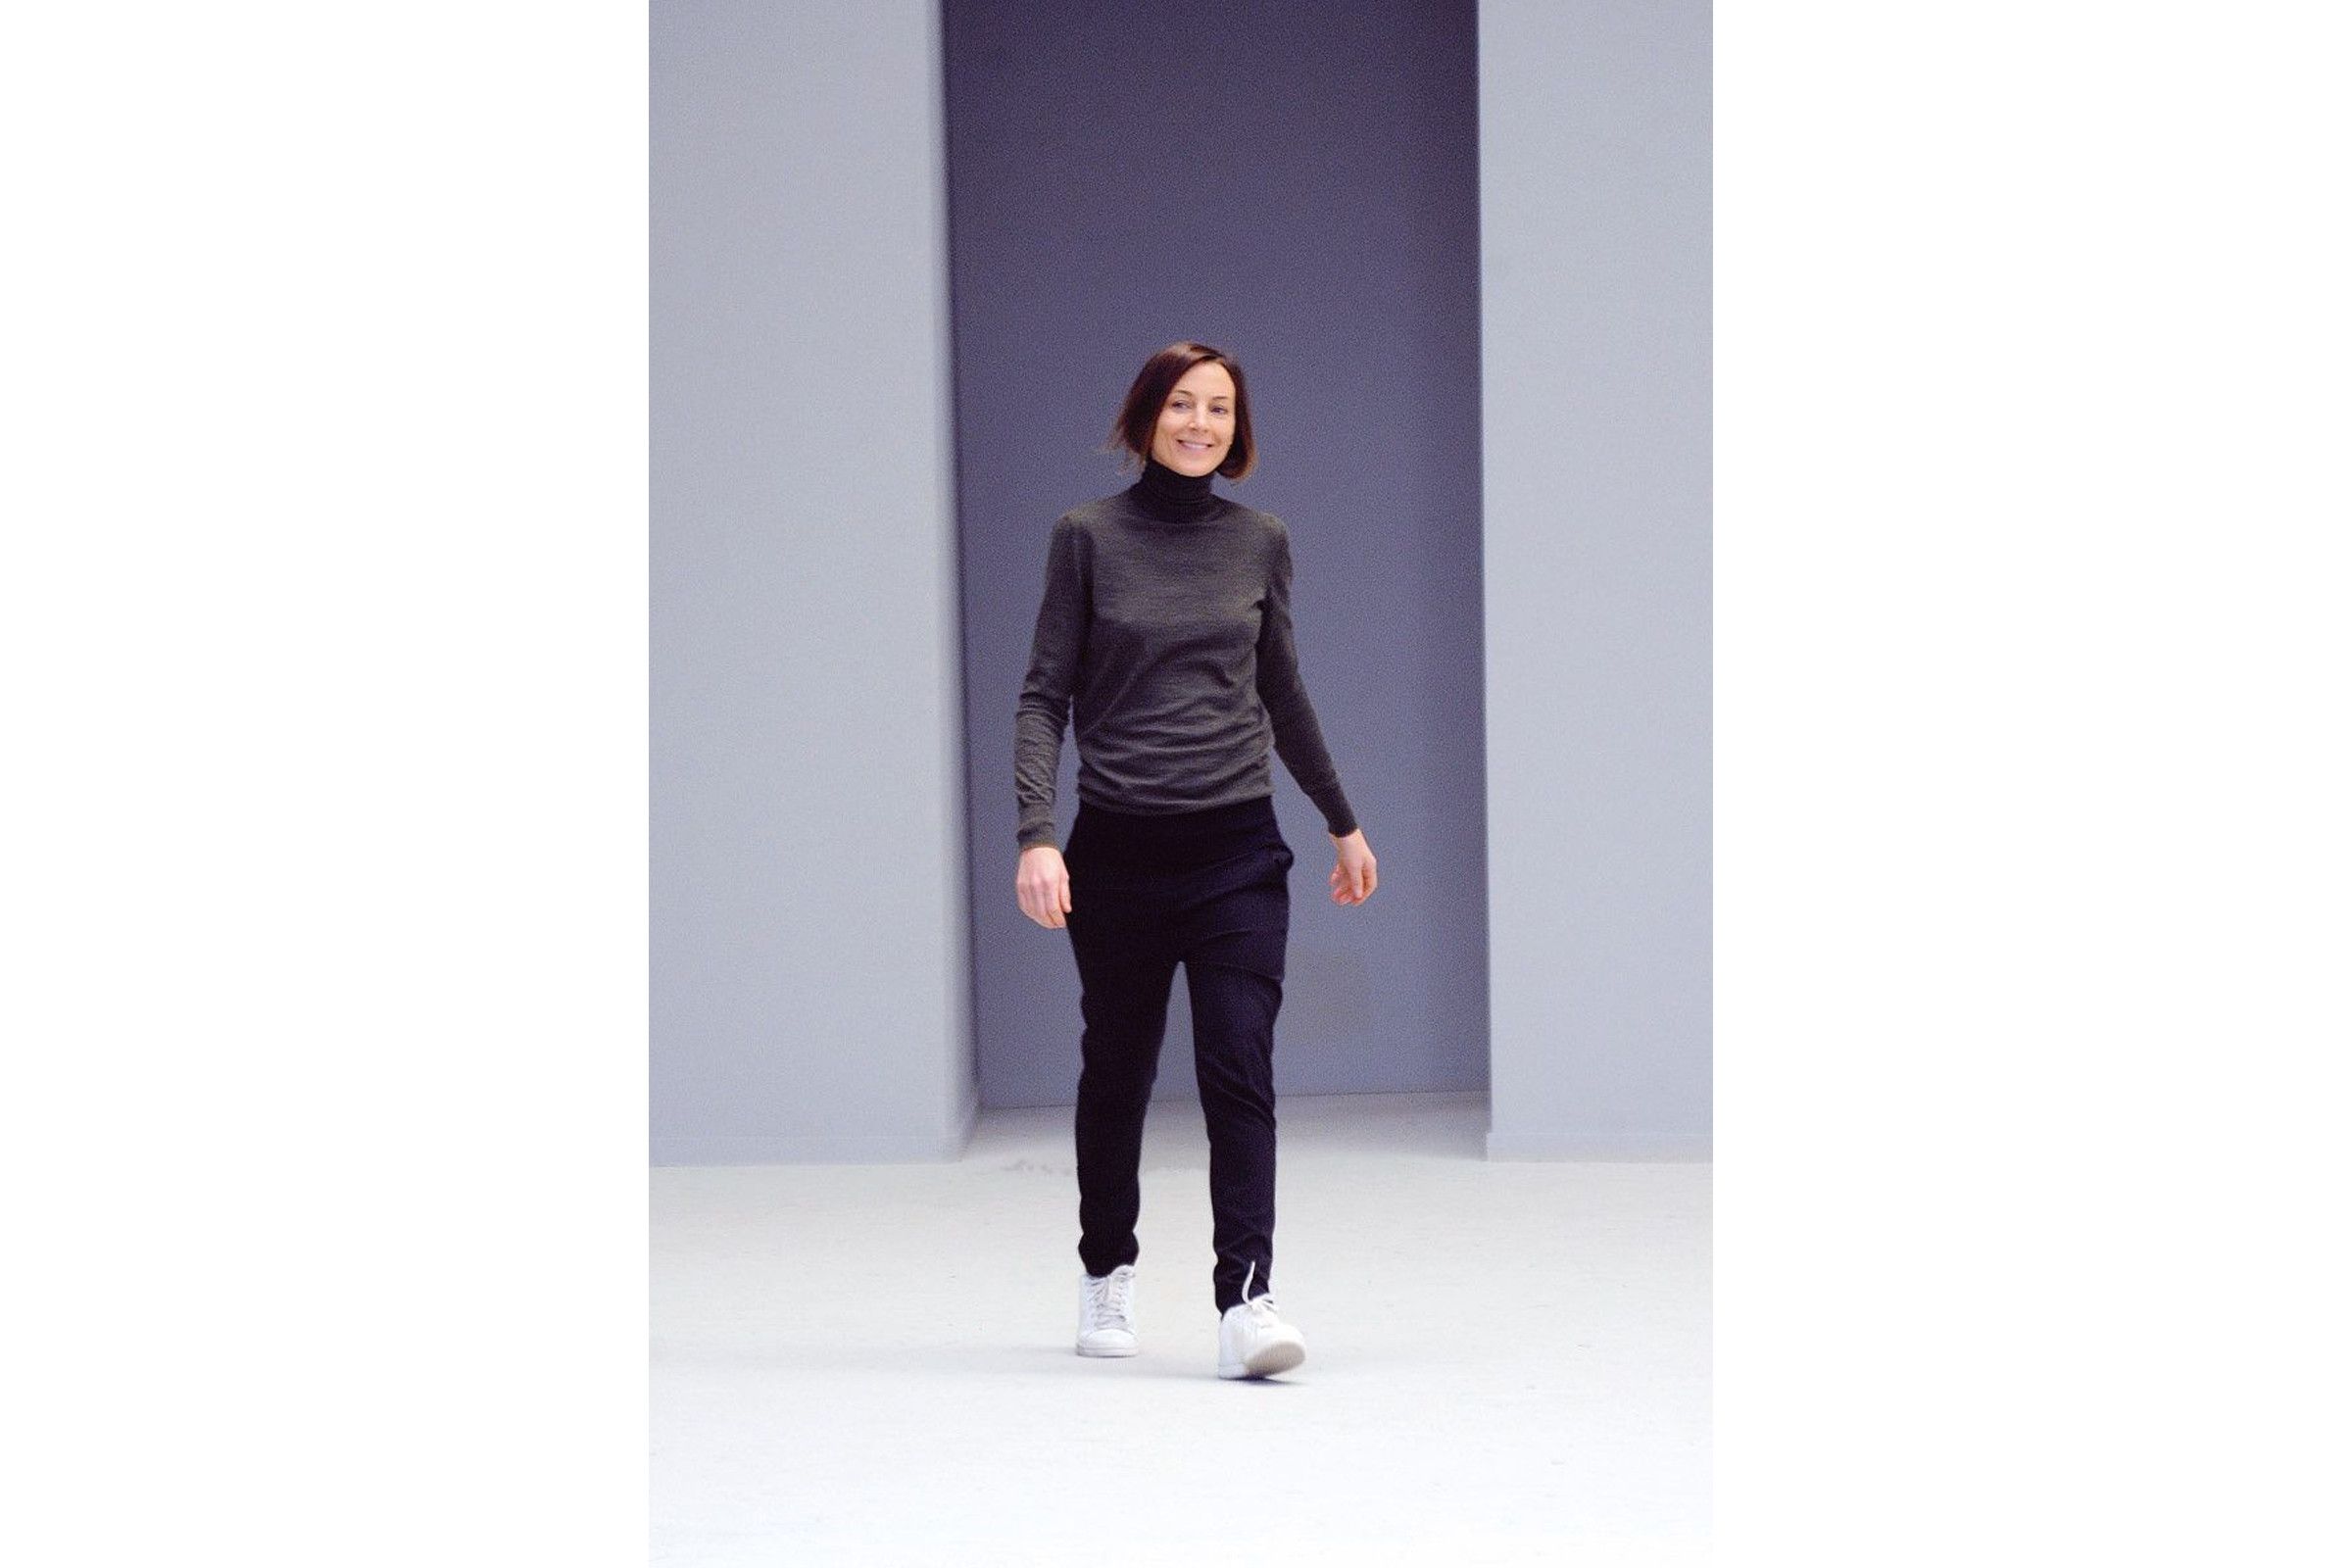 Phoebe Philo taking her post-fashion show bow during the Fall/Winter 2011 season